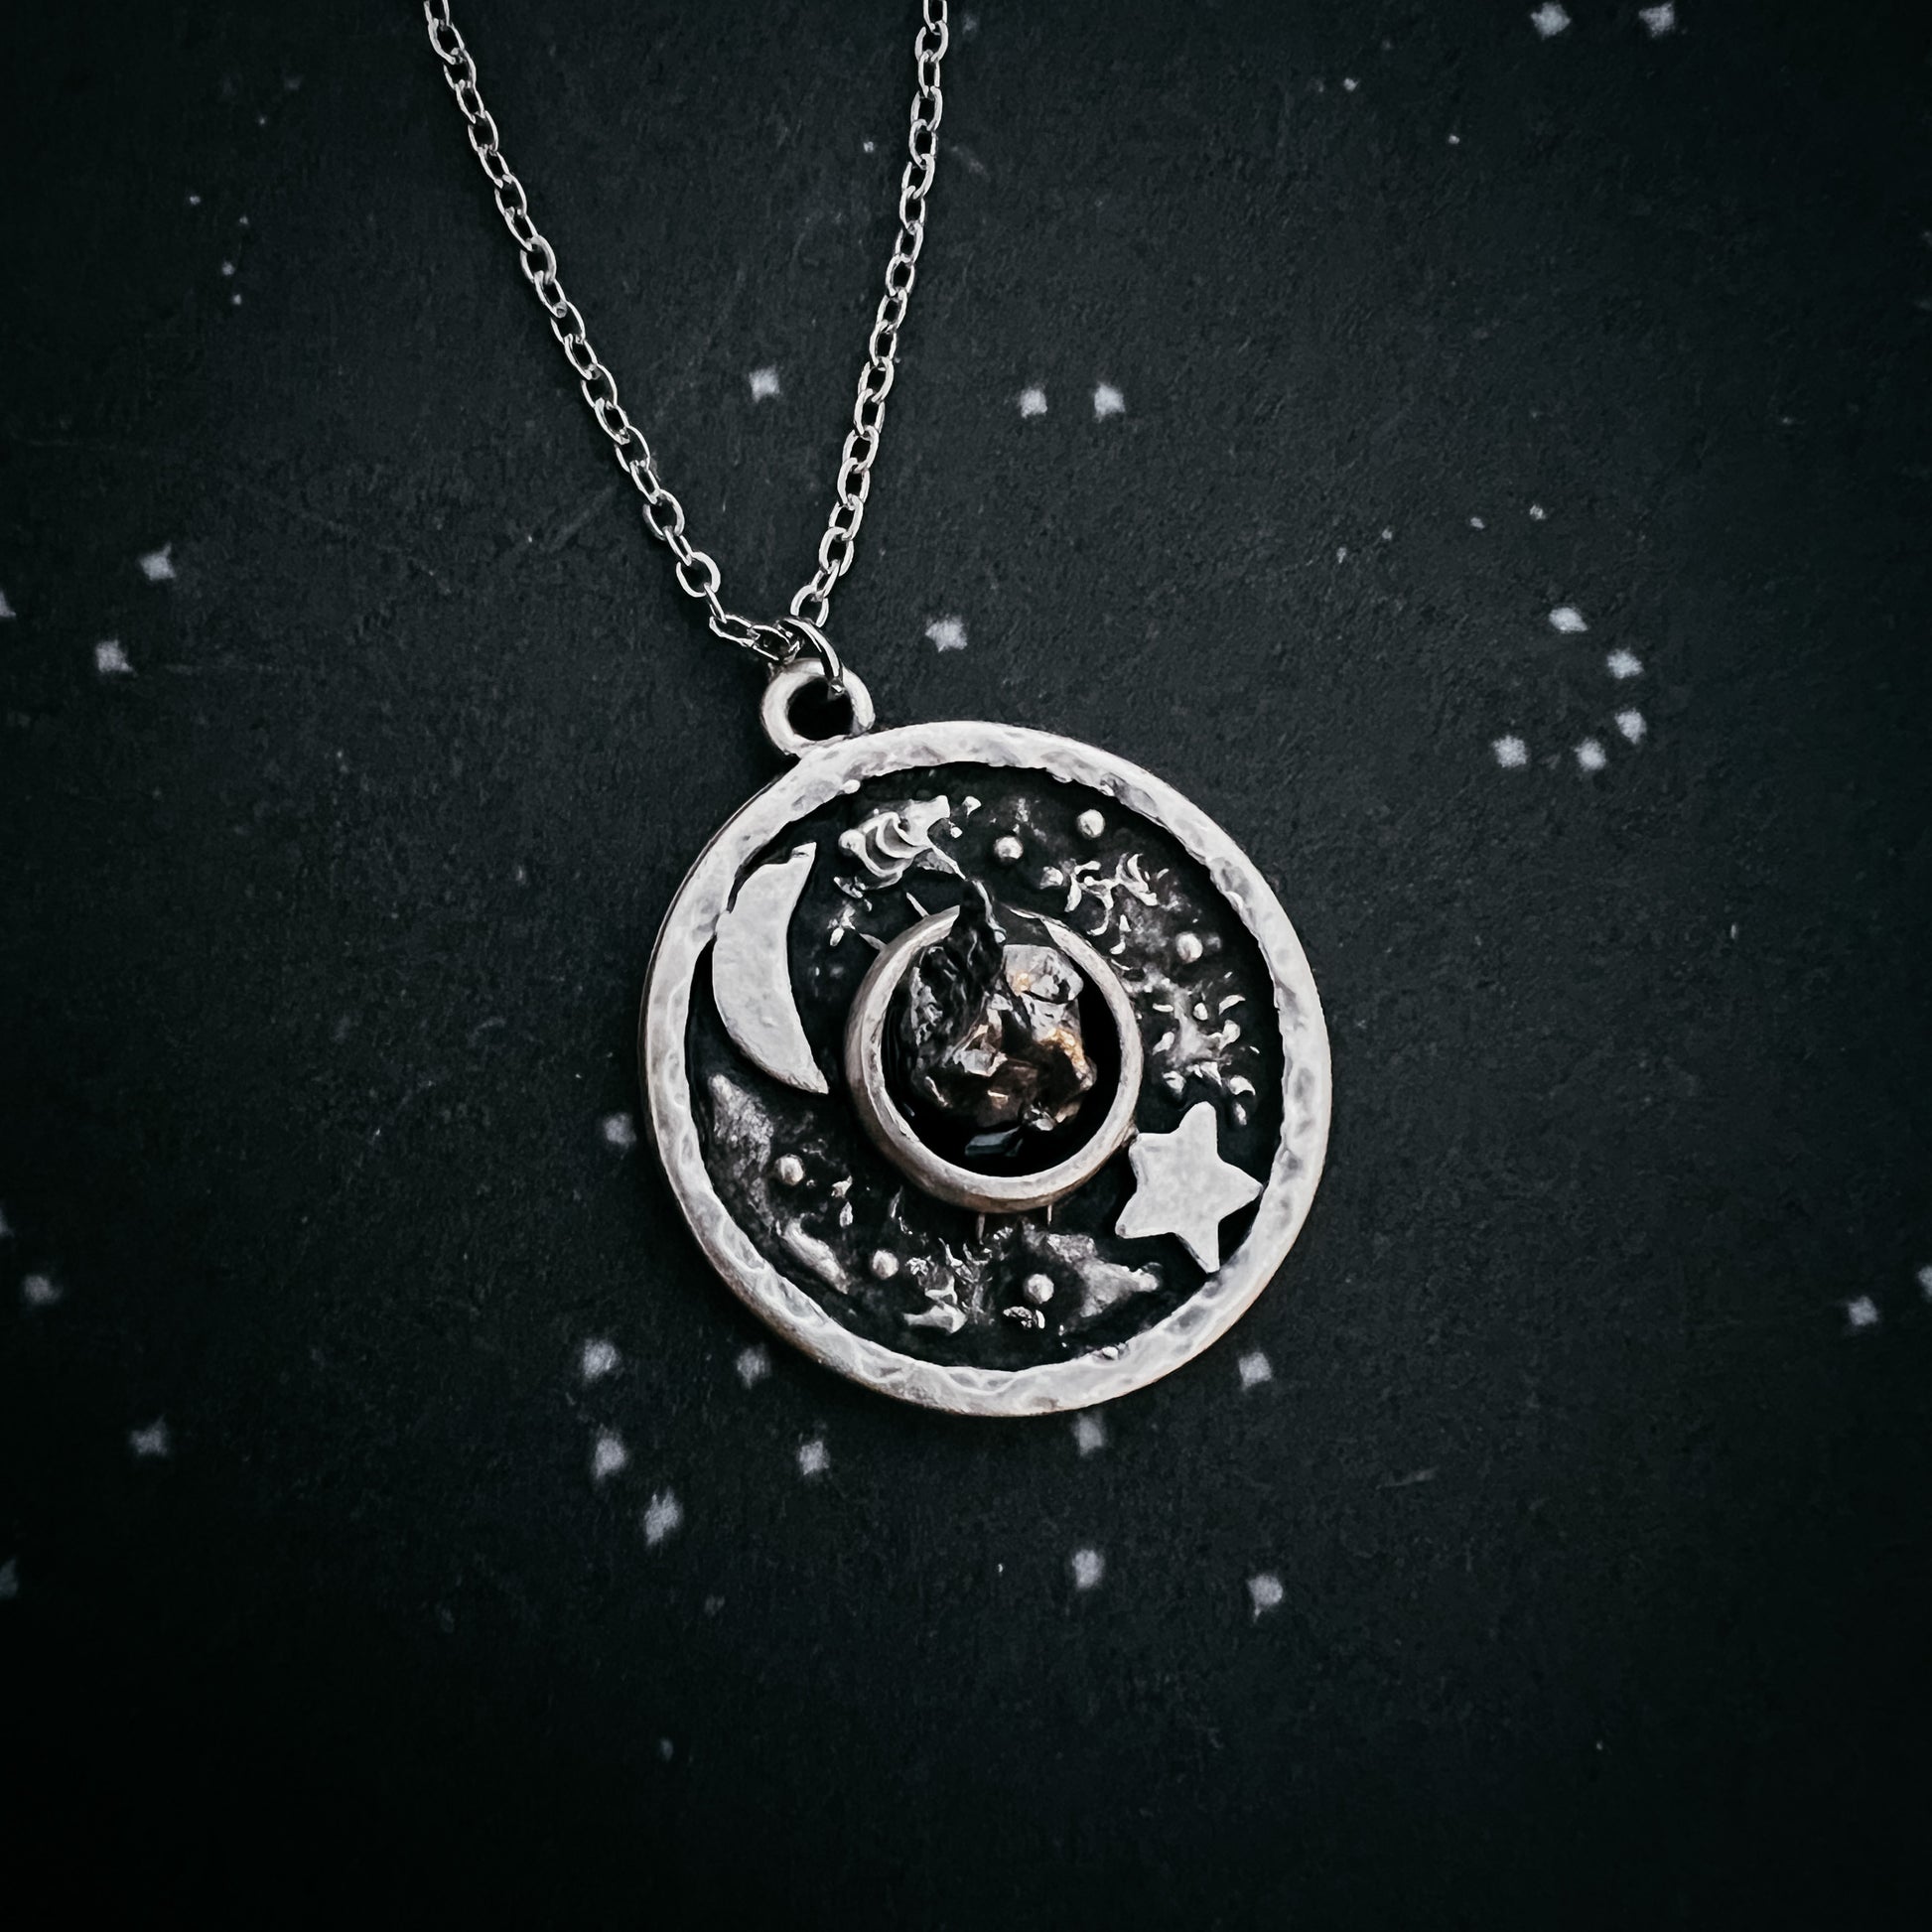 Night Sky Pendant Necklace with Authentic Meteorite Necklace Yugen Handmade   